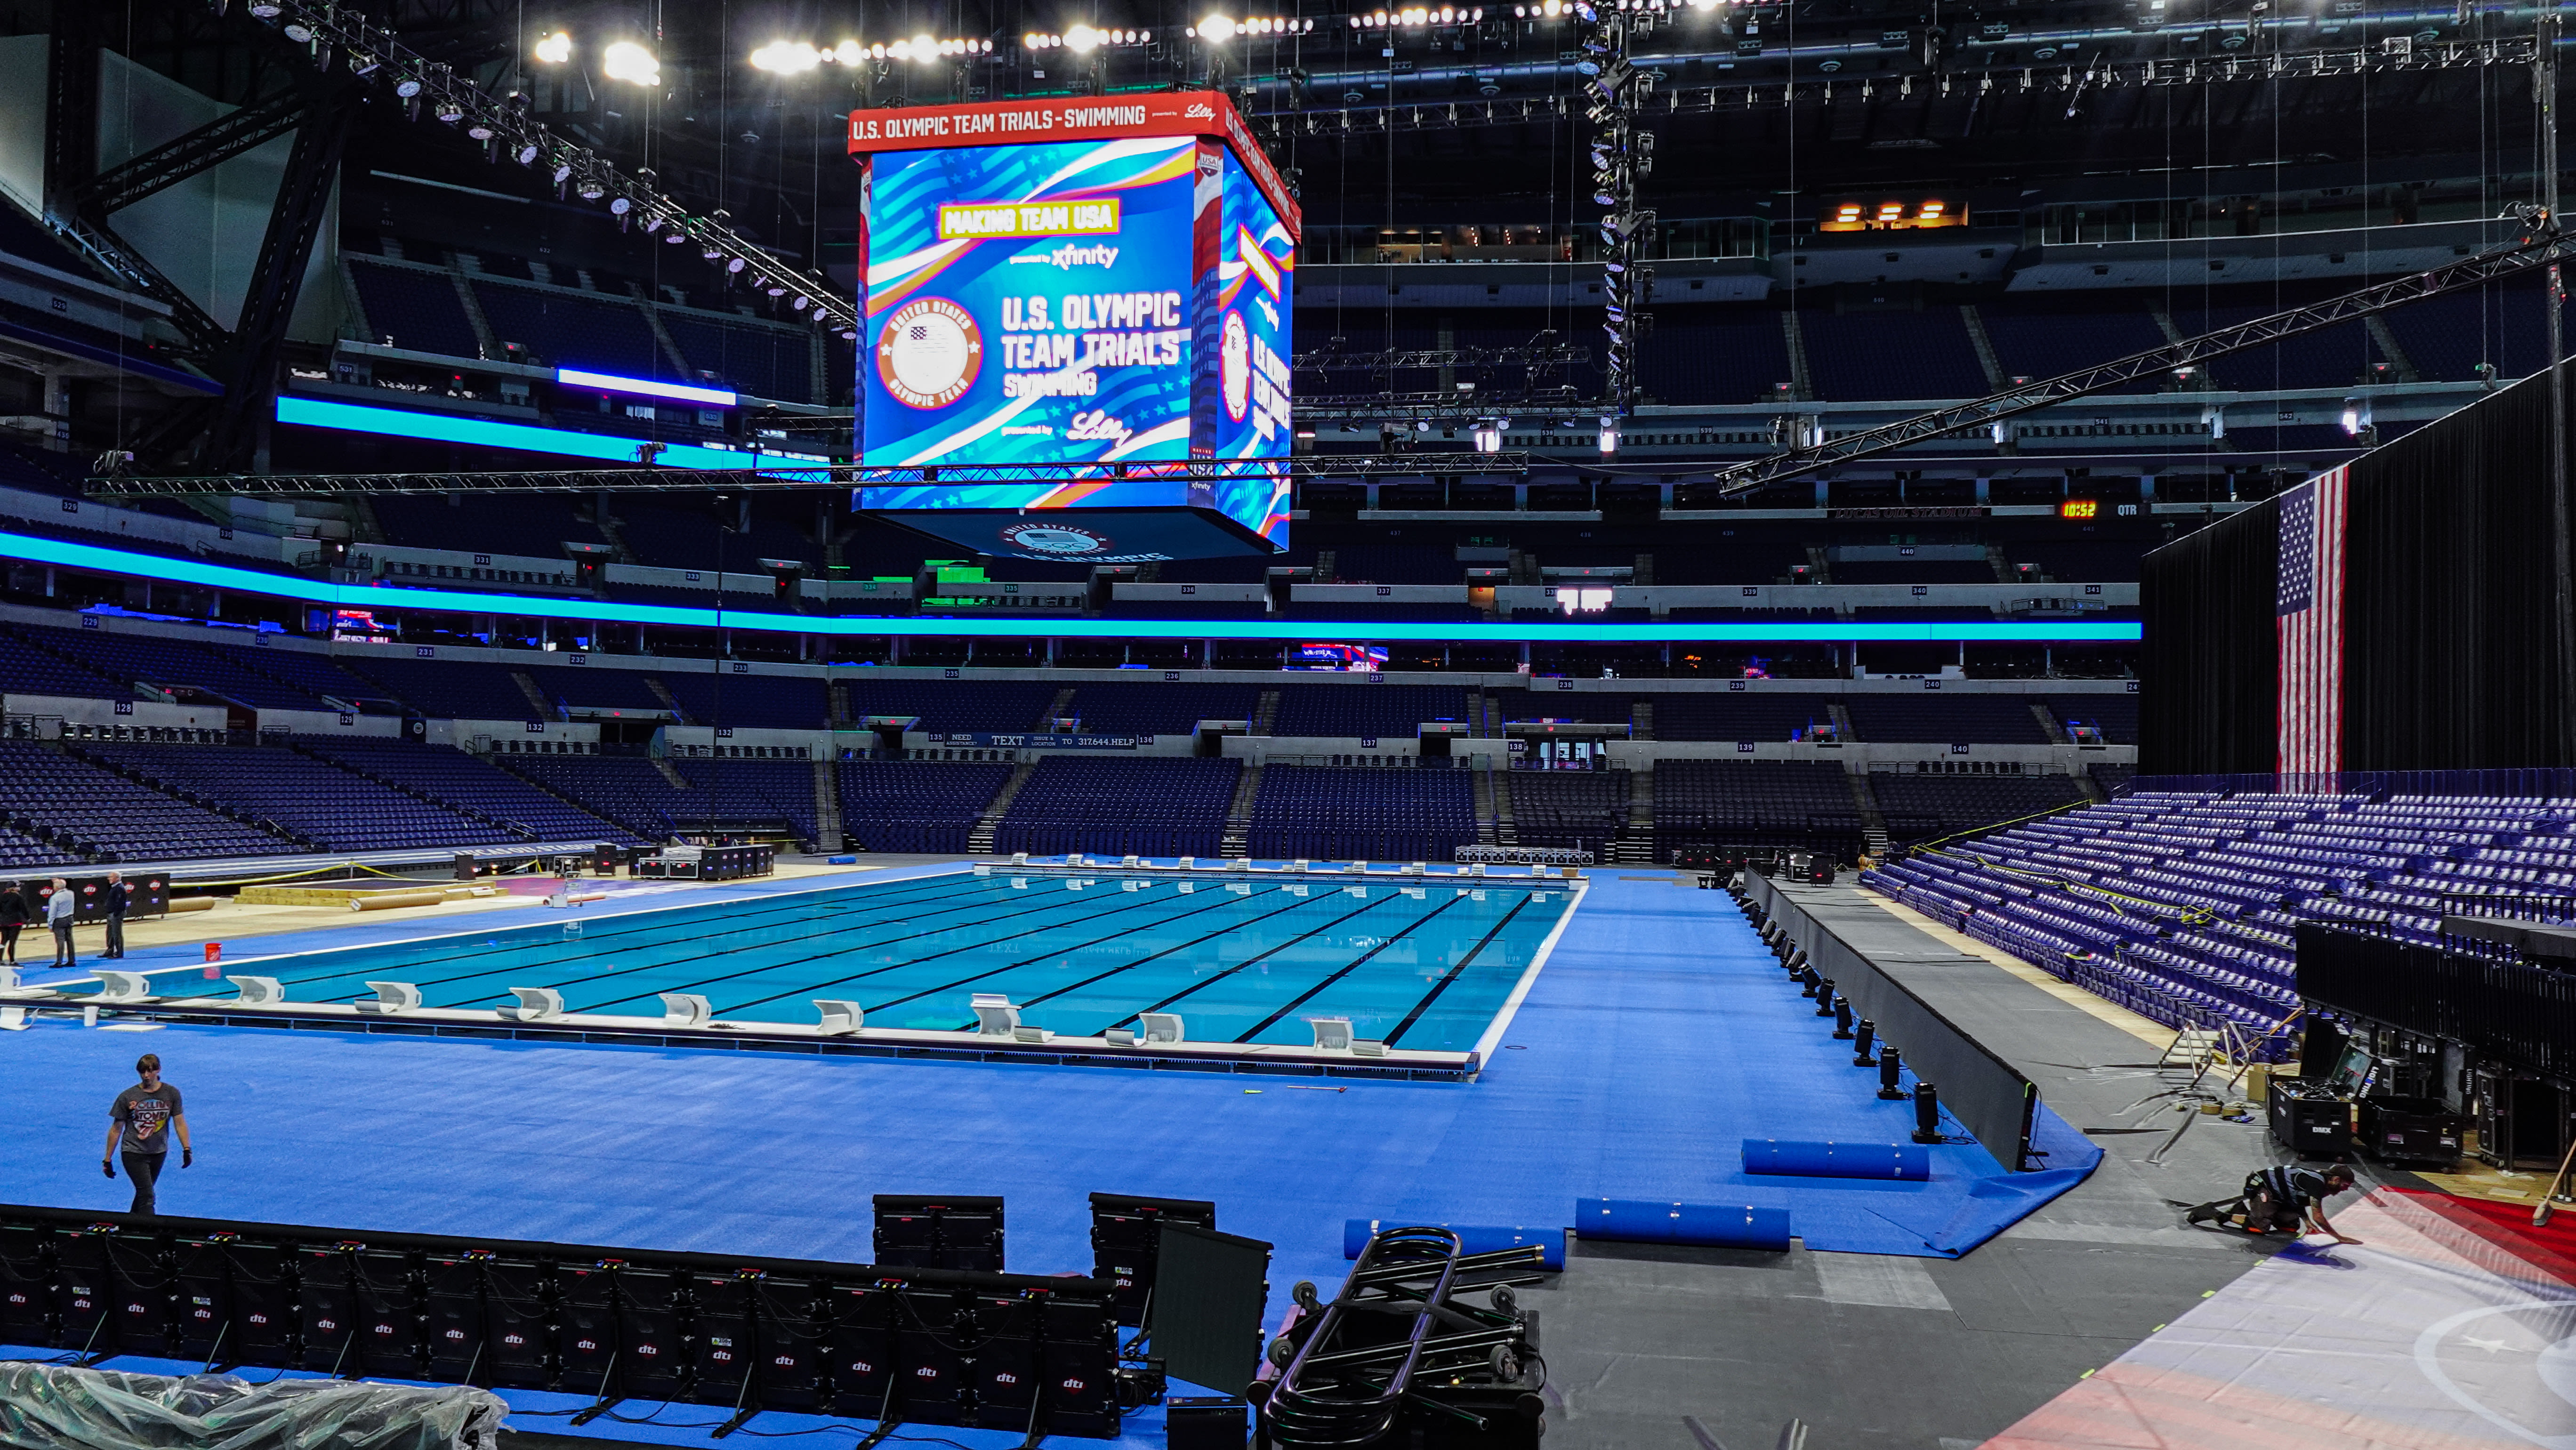 A swimming pool in … an NFL stadium? Welcome to U.S. Olympic trials